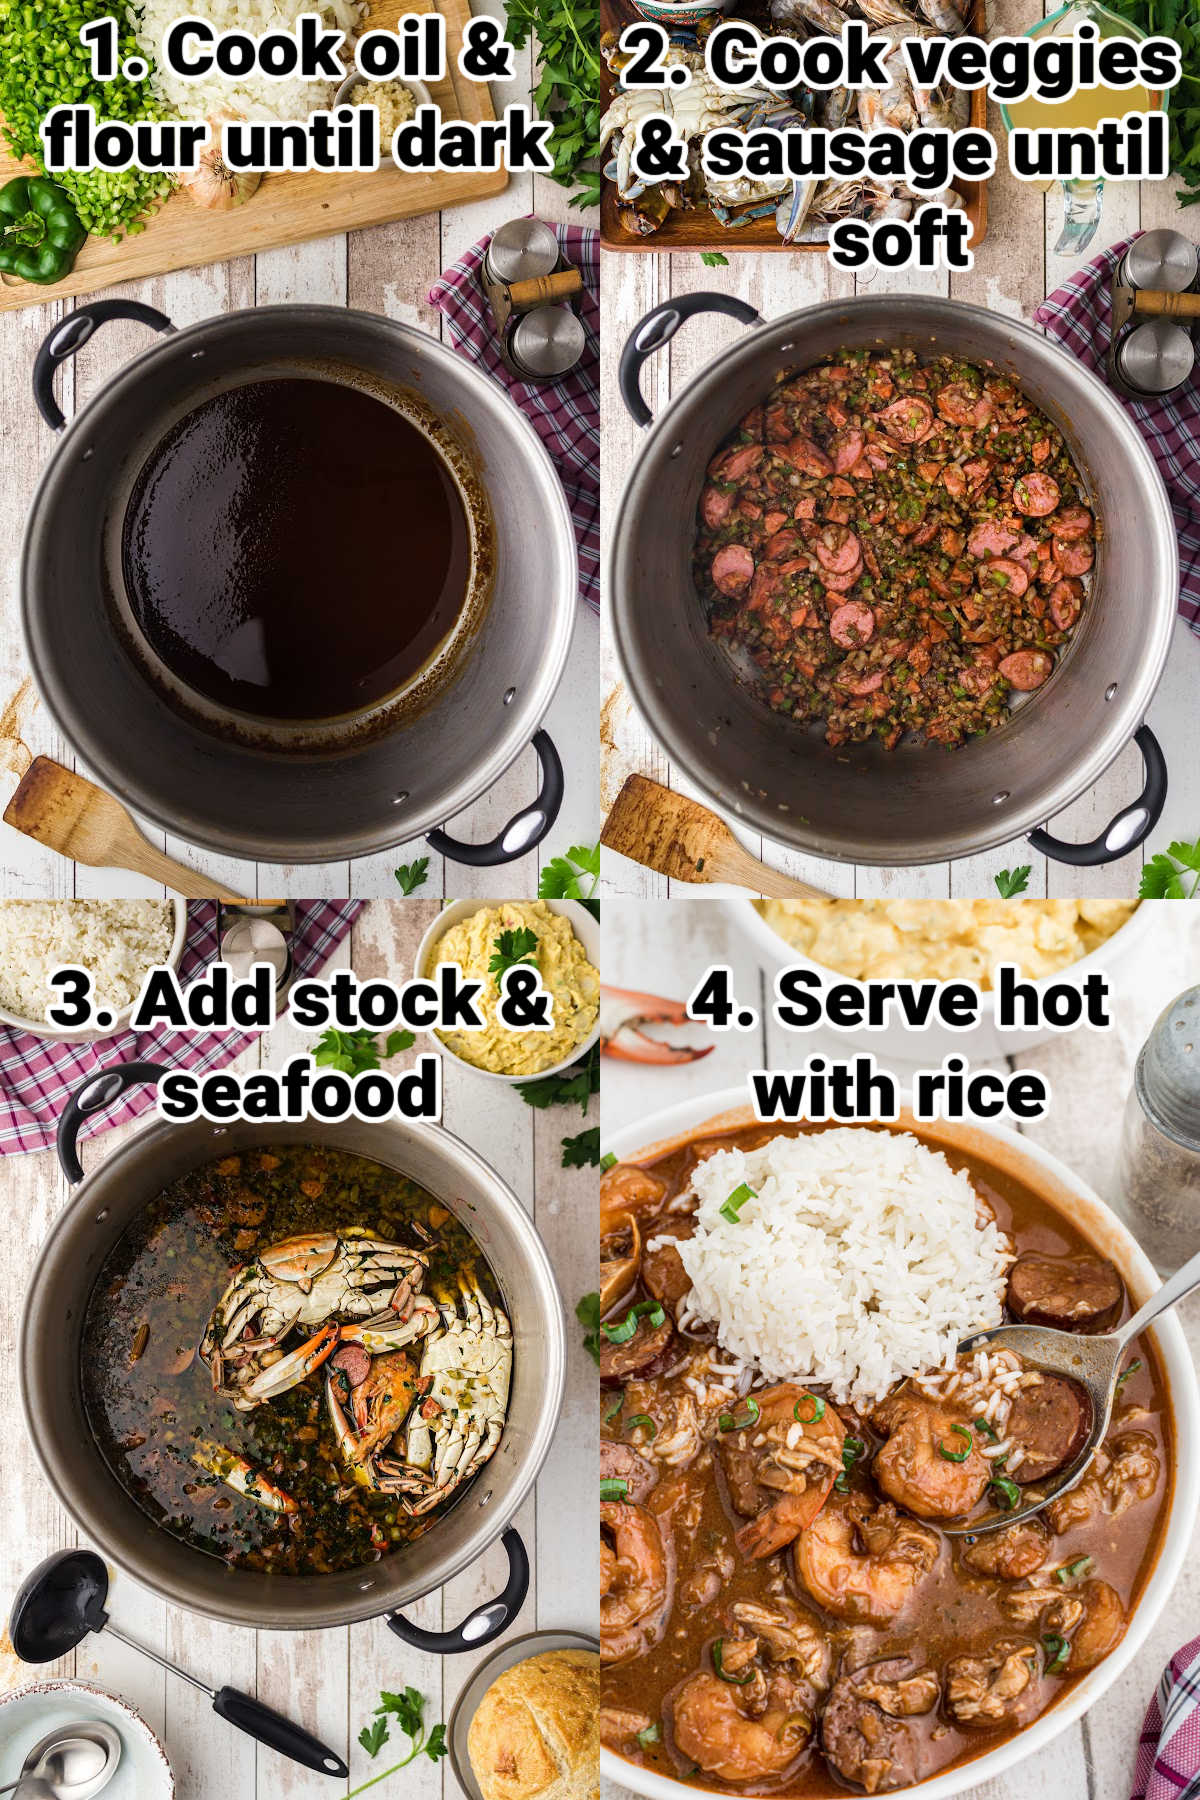 Recipe steps showing how to make a Louisiana seafood gumbo.